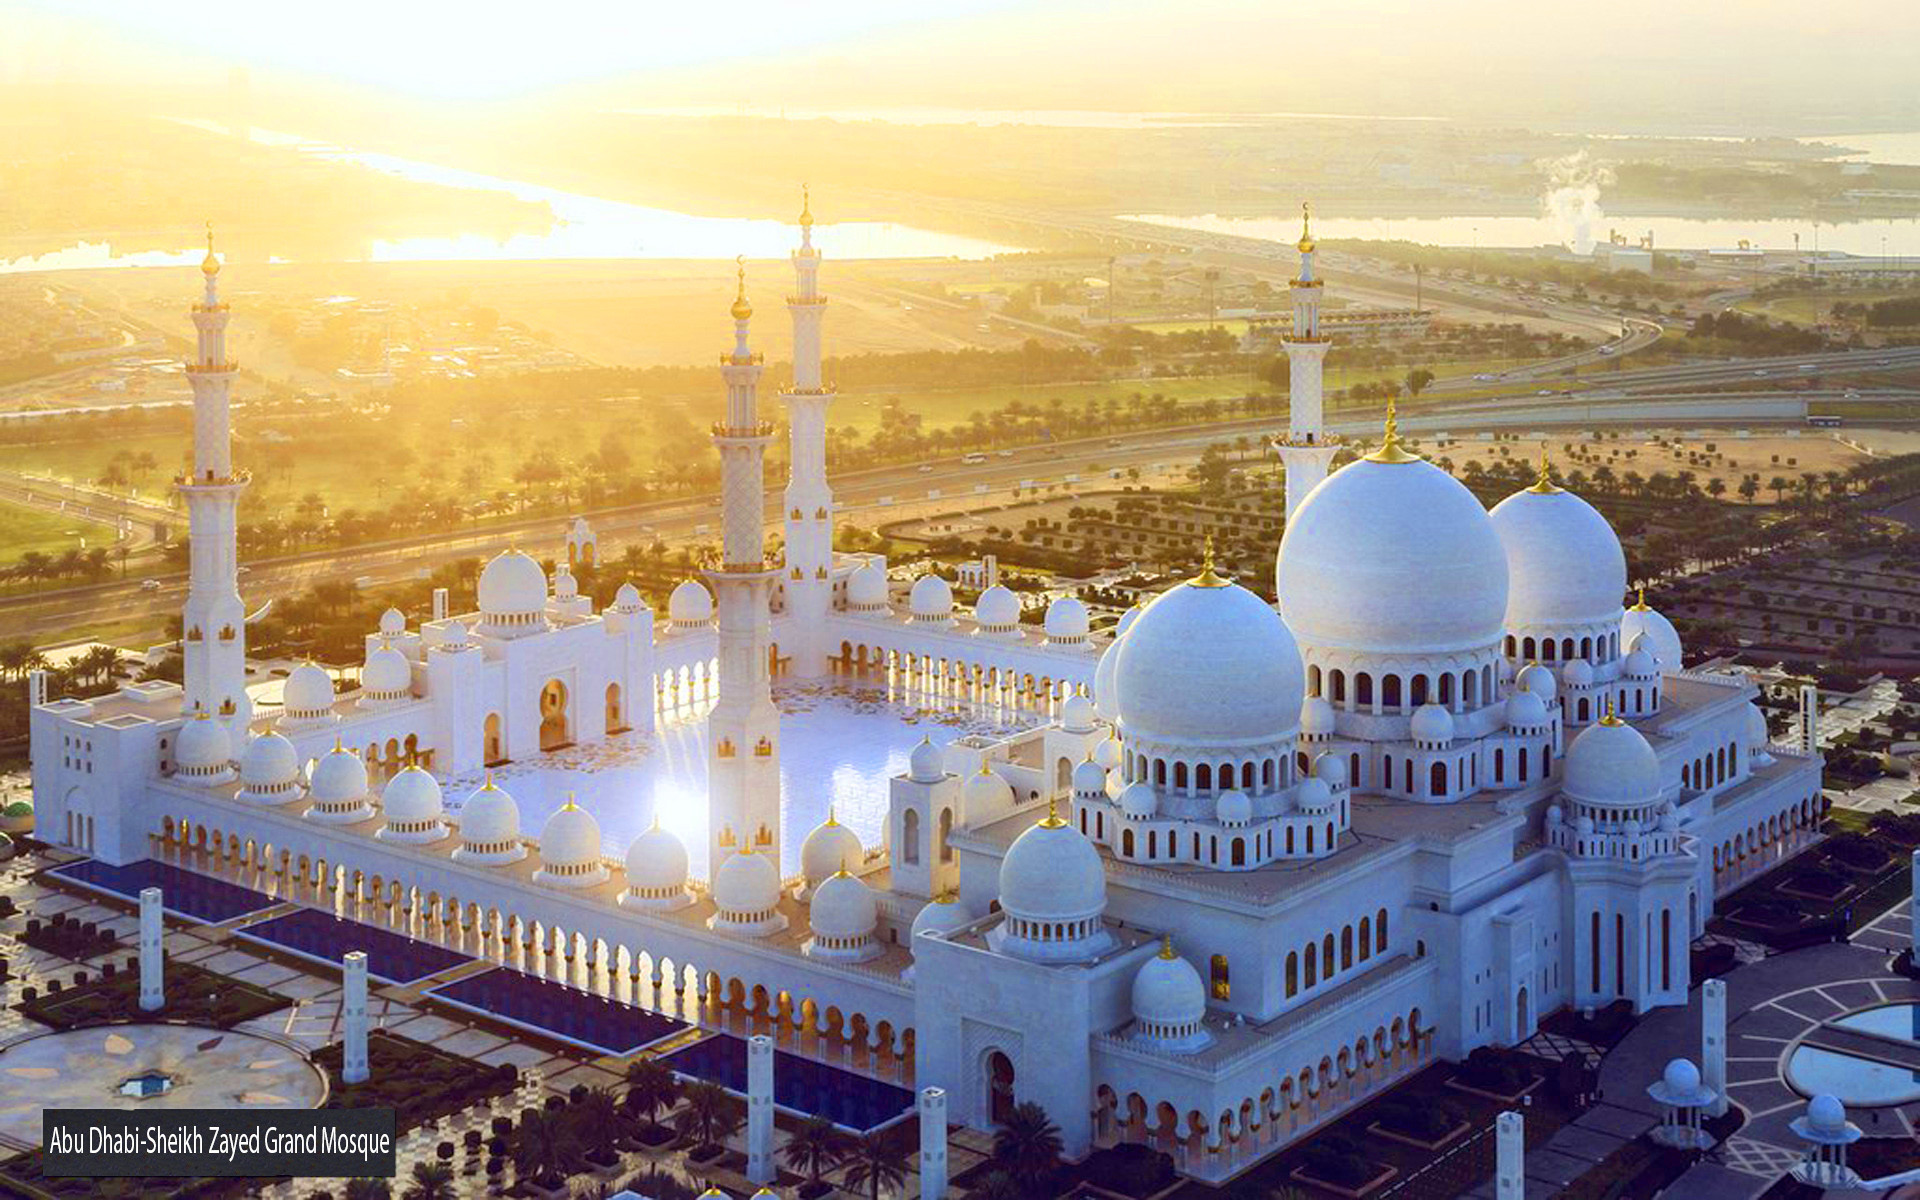 HD wallpapers of Beautiful Mosques around the world - Taza Tarin